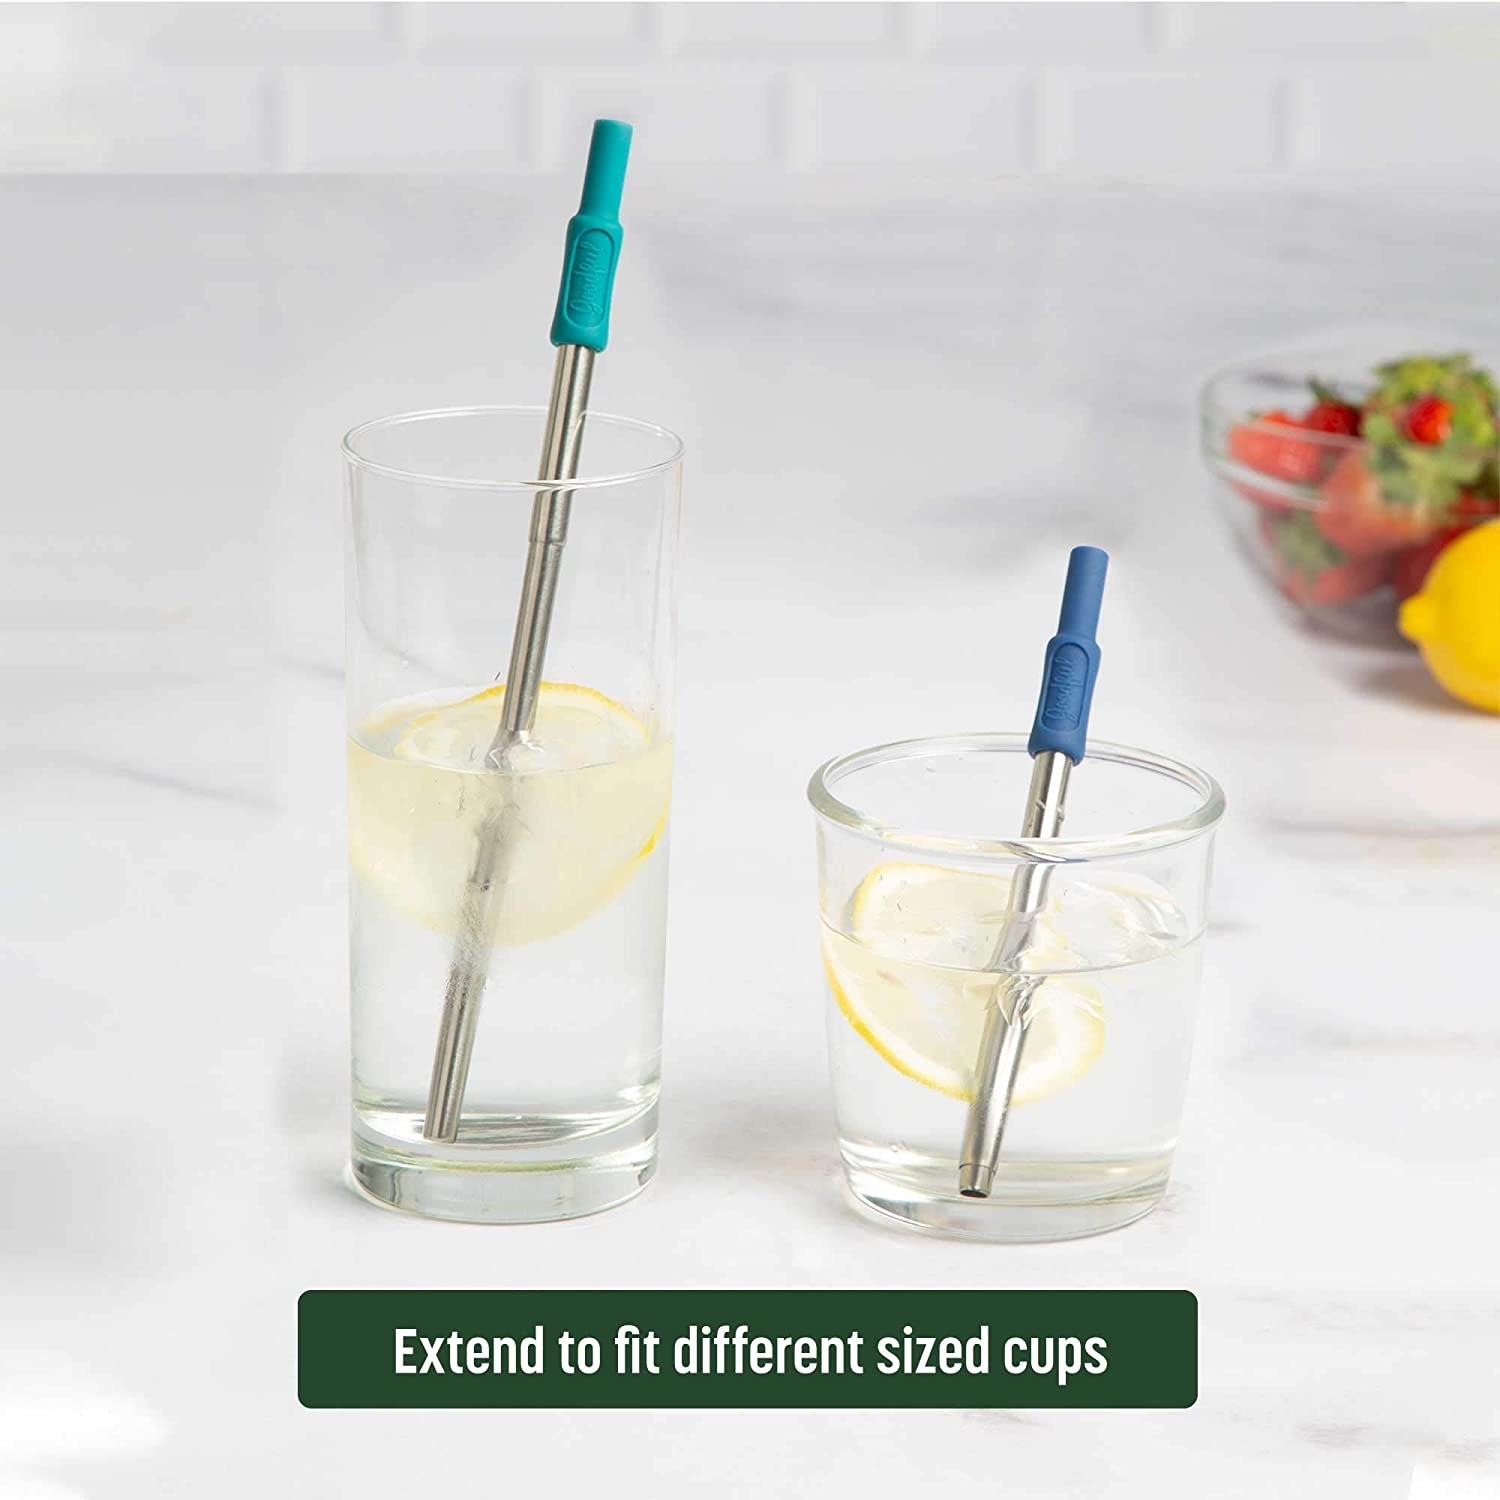 the metal straws with blue silicone tips placed in different sized glasses